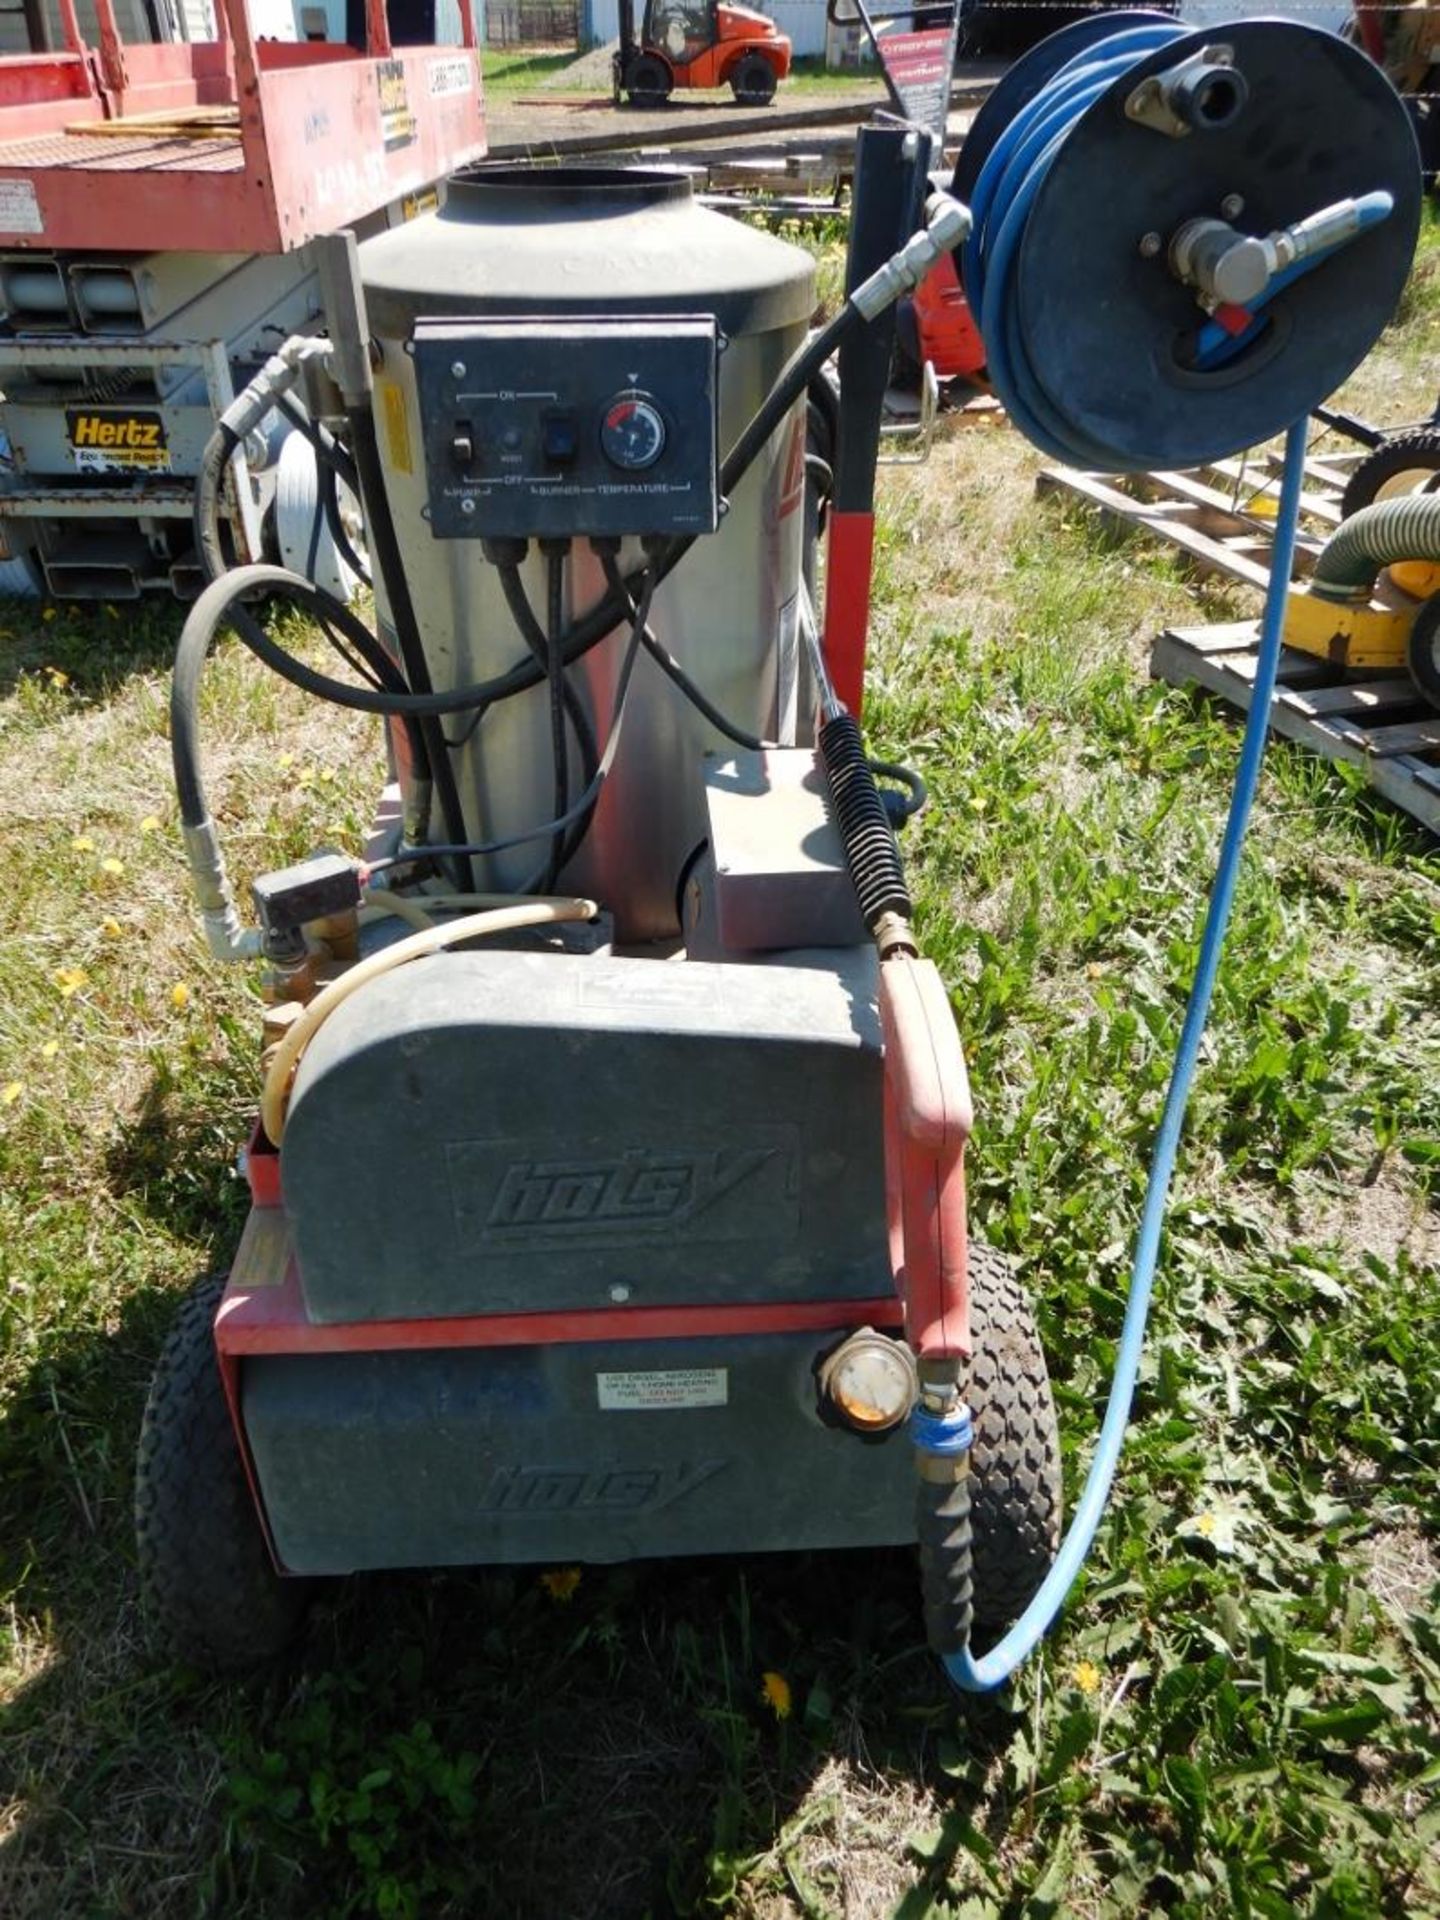 HOTSY HOT WATER ELECTRIC PRESSURE WASHER W/ HOSE REEL, HOSE, AND WASH WAND - Image 6 of 6